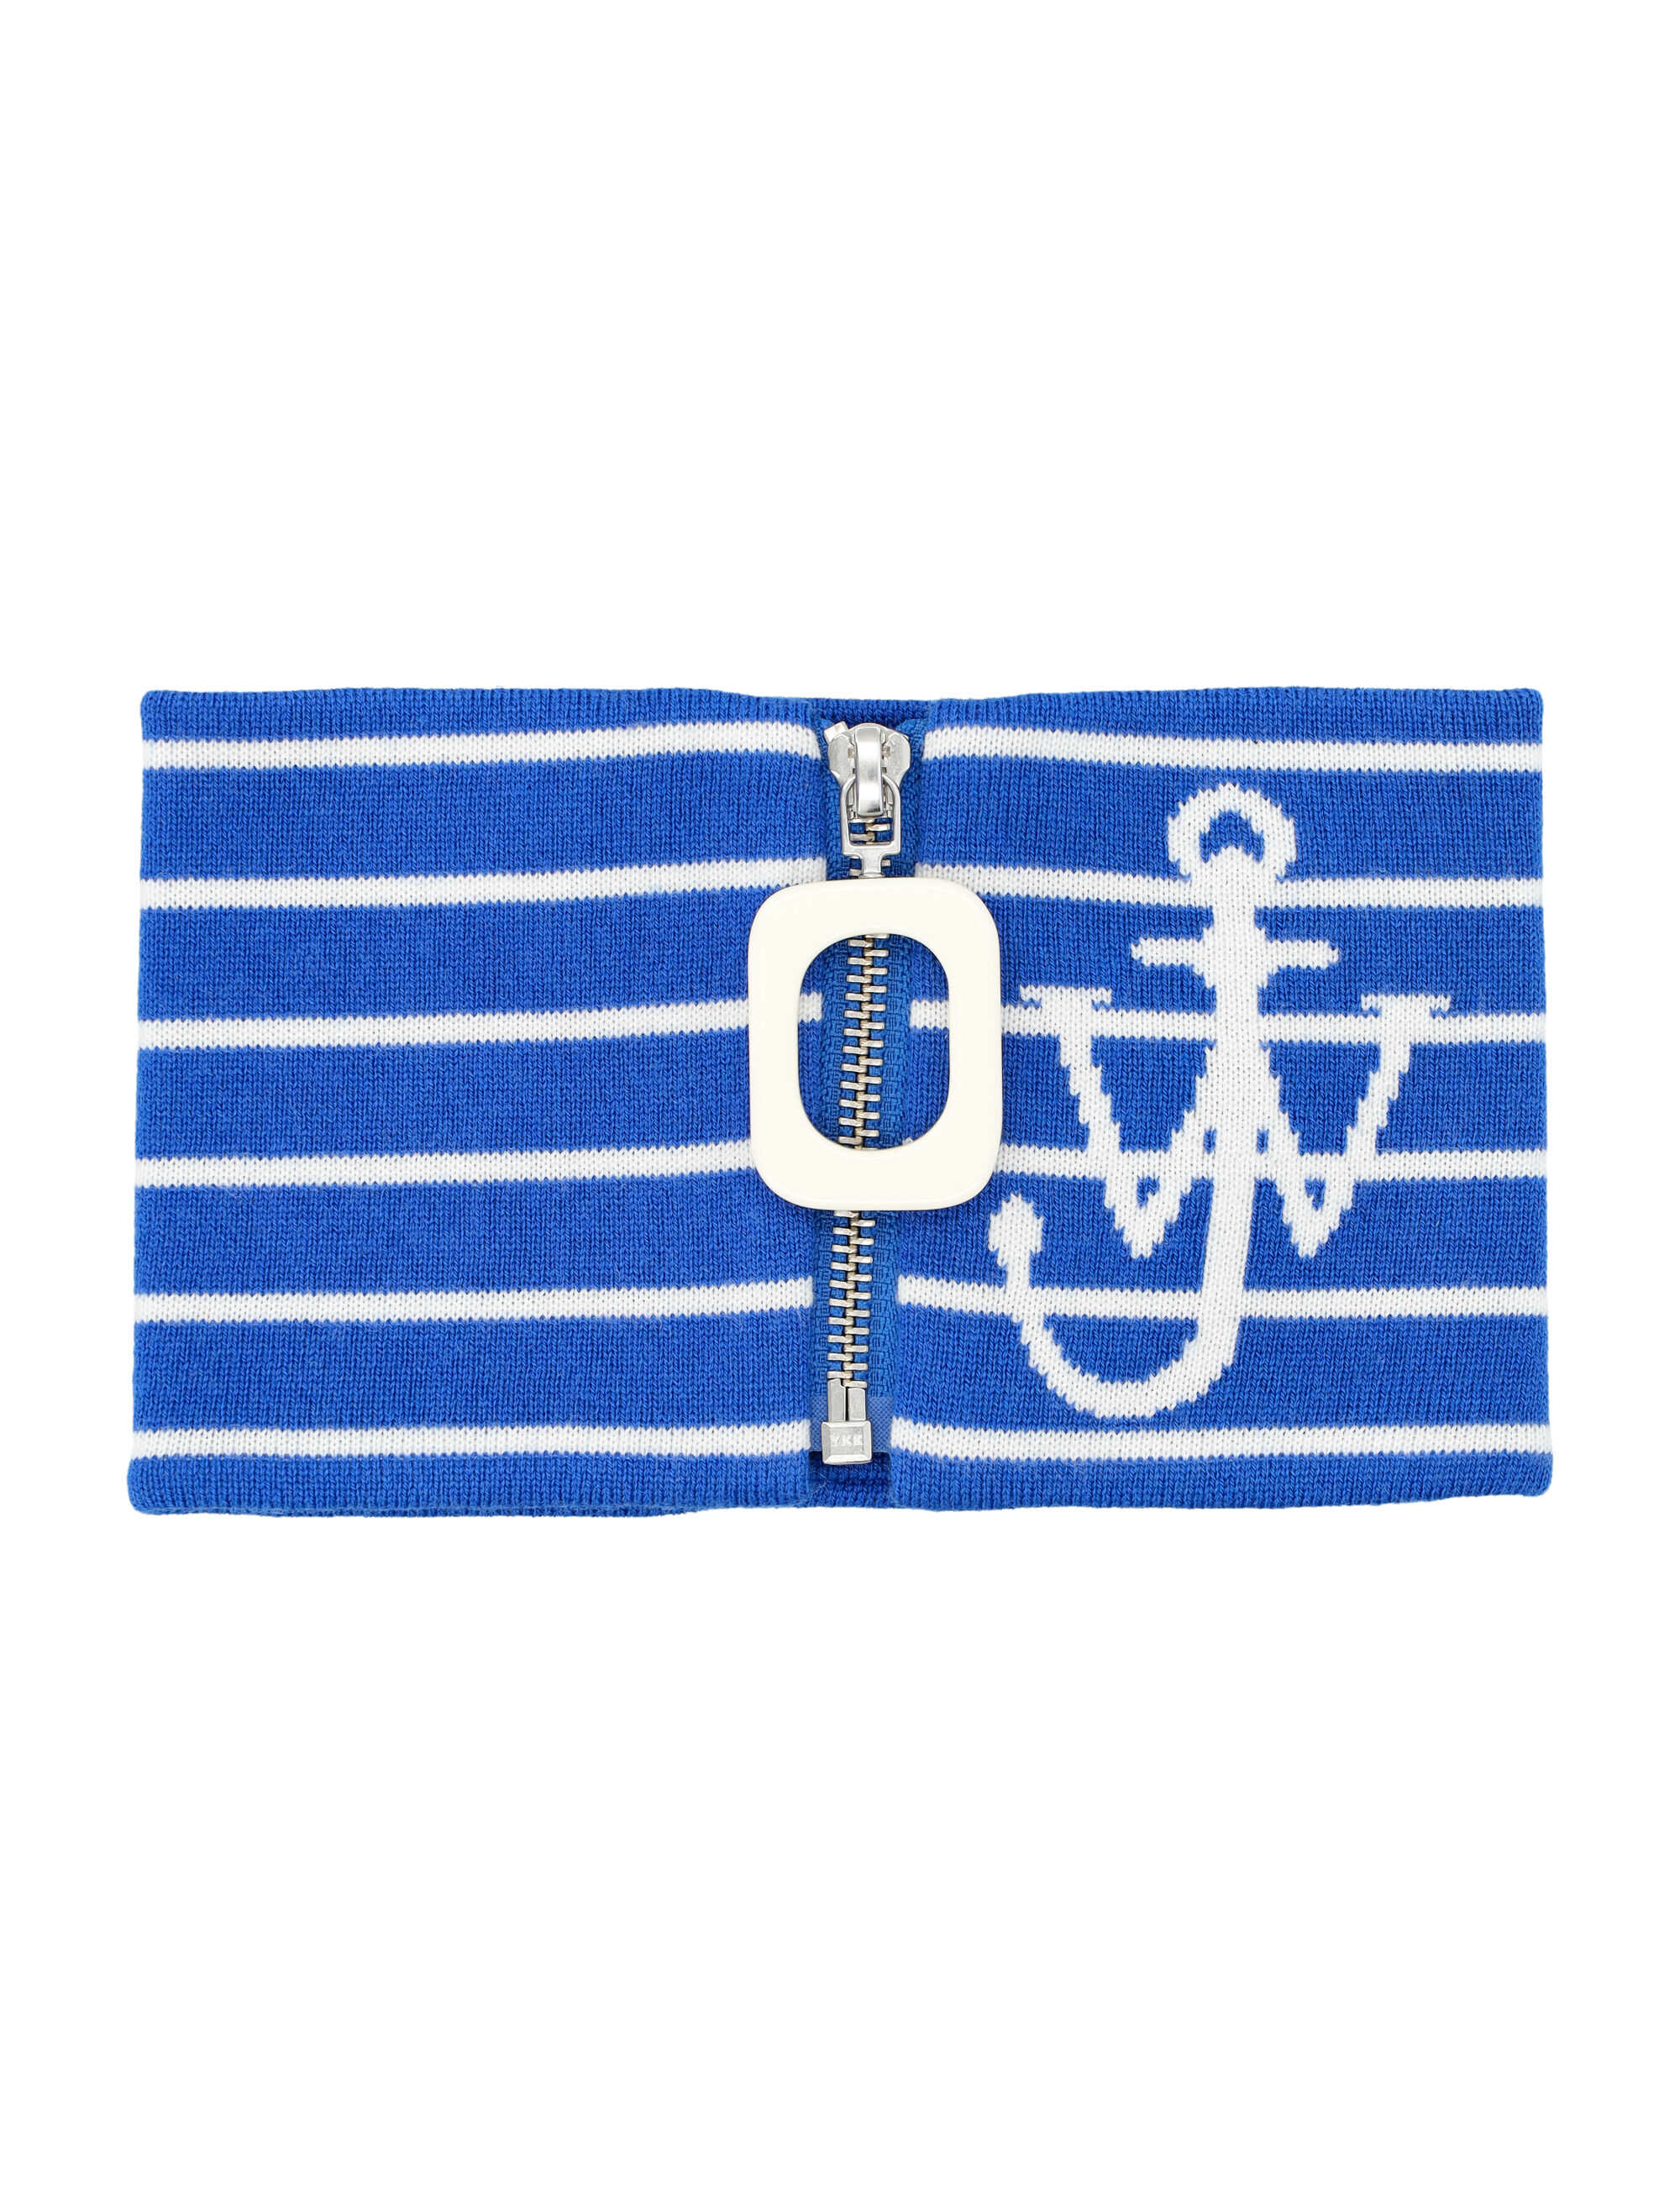 JW Anderson Striped anchor Neckband Blue